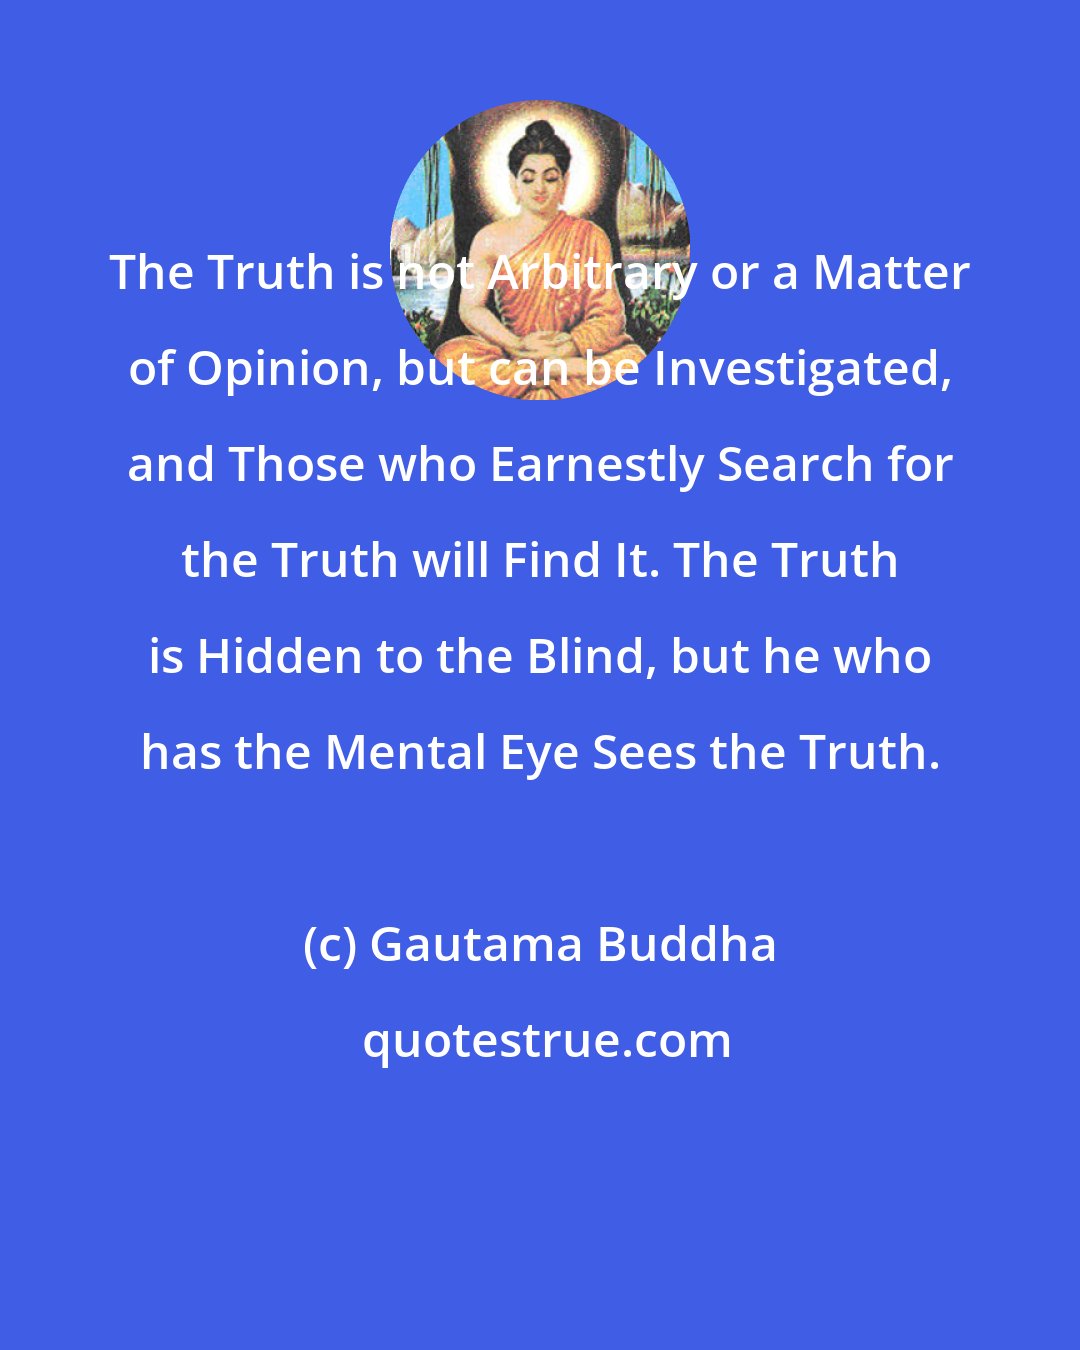 Gautama Buddha: The Truth is not Arbitrary or a Matter of Opinion, but can be Investigated, and Those who Earnestly Search for the Truth will Find It. The Truth is Hidden to the Blind, but he who has the Mental Eye Sees the Truth.